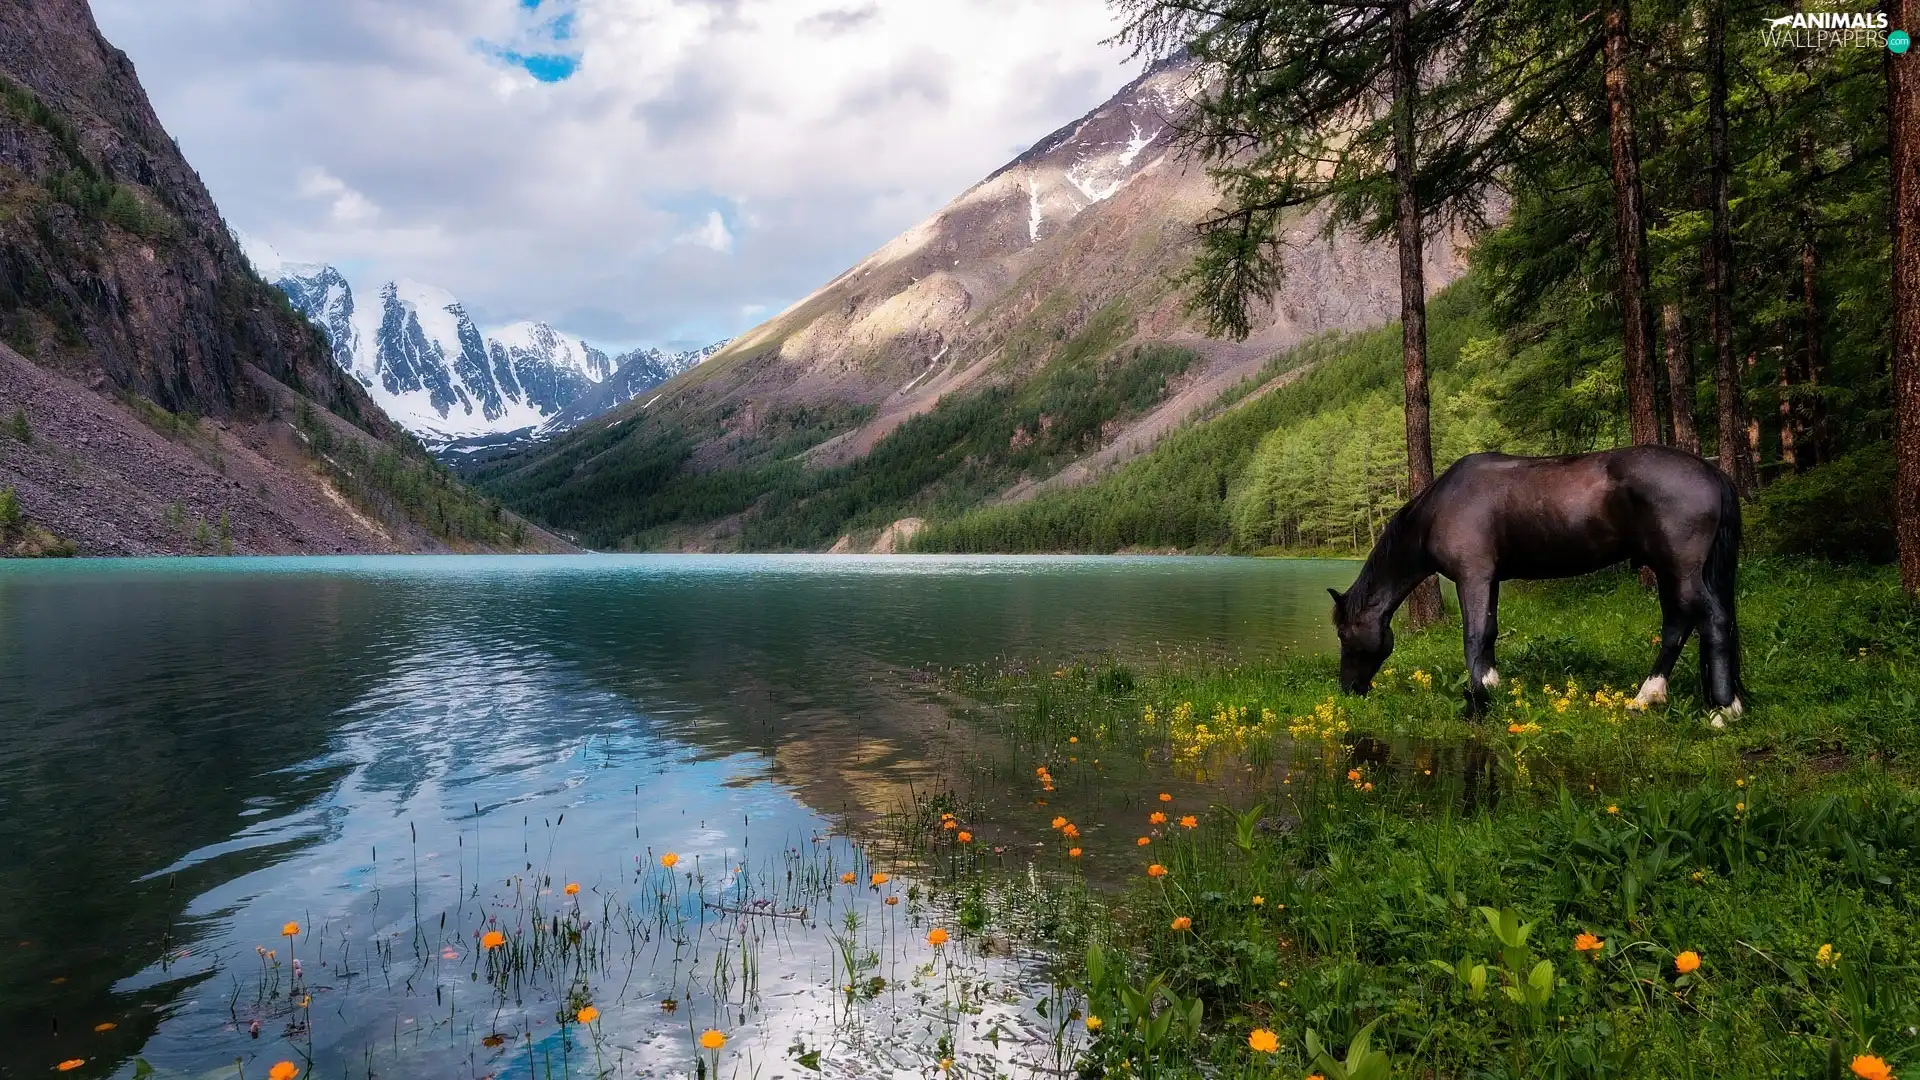 Horse, Mountains, trees, viewes, Flowers, lake